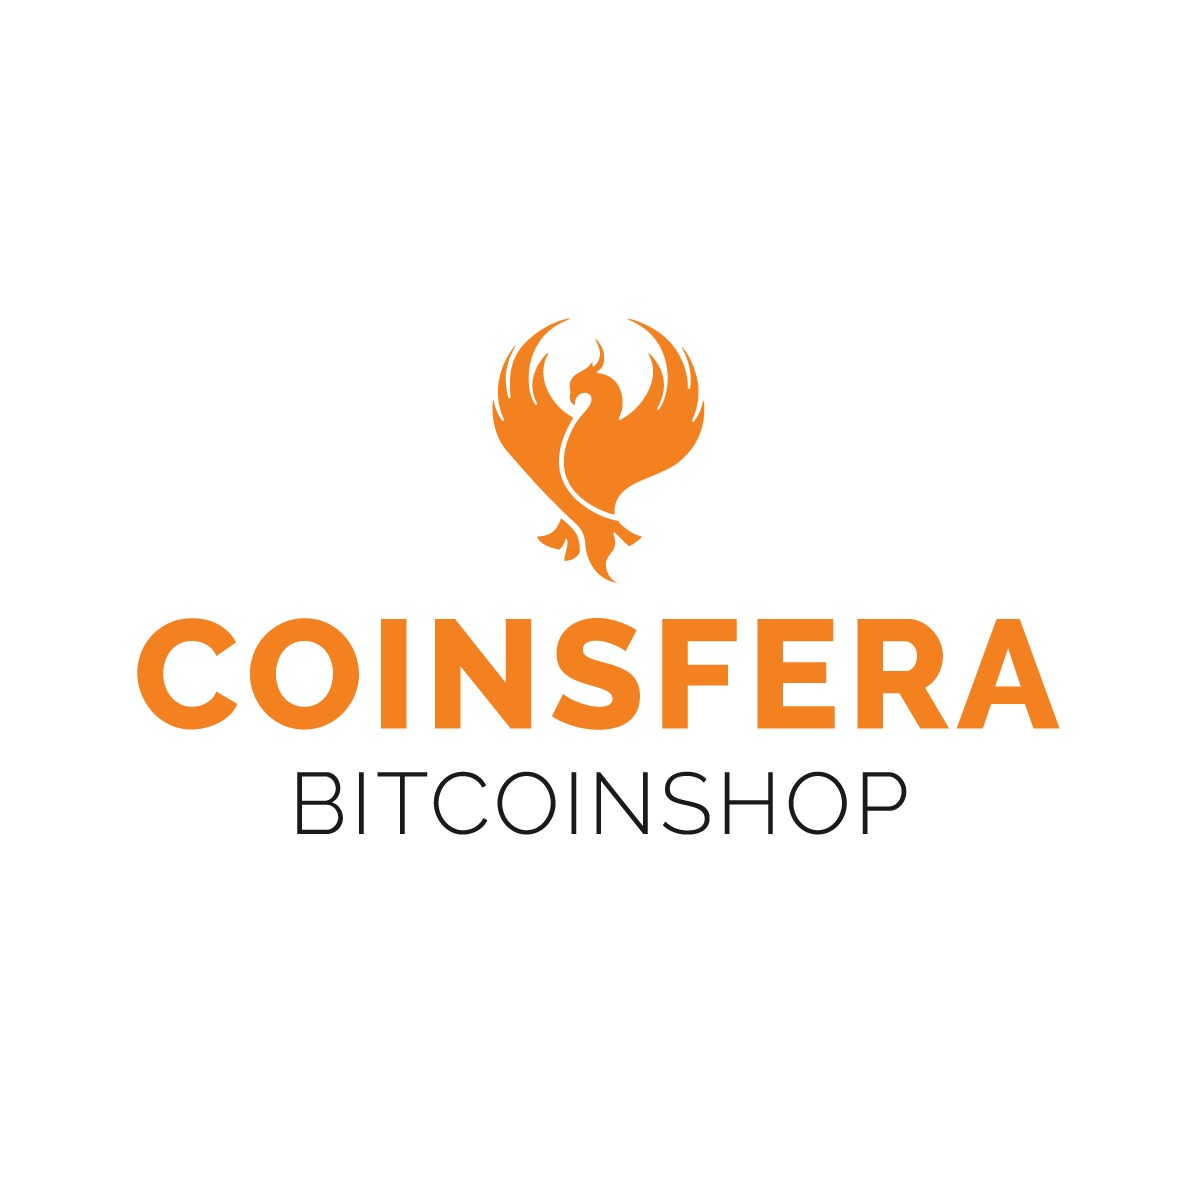 Coinsfera is Helping People in Dubai to Sell Bitcoin in Dubai for Cash